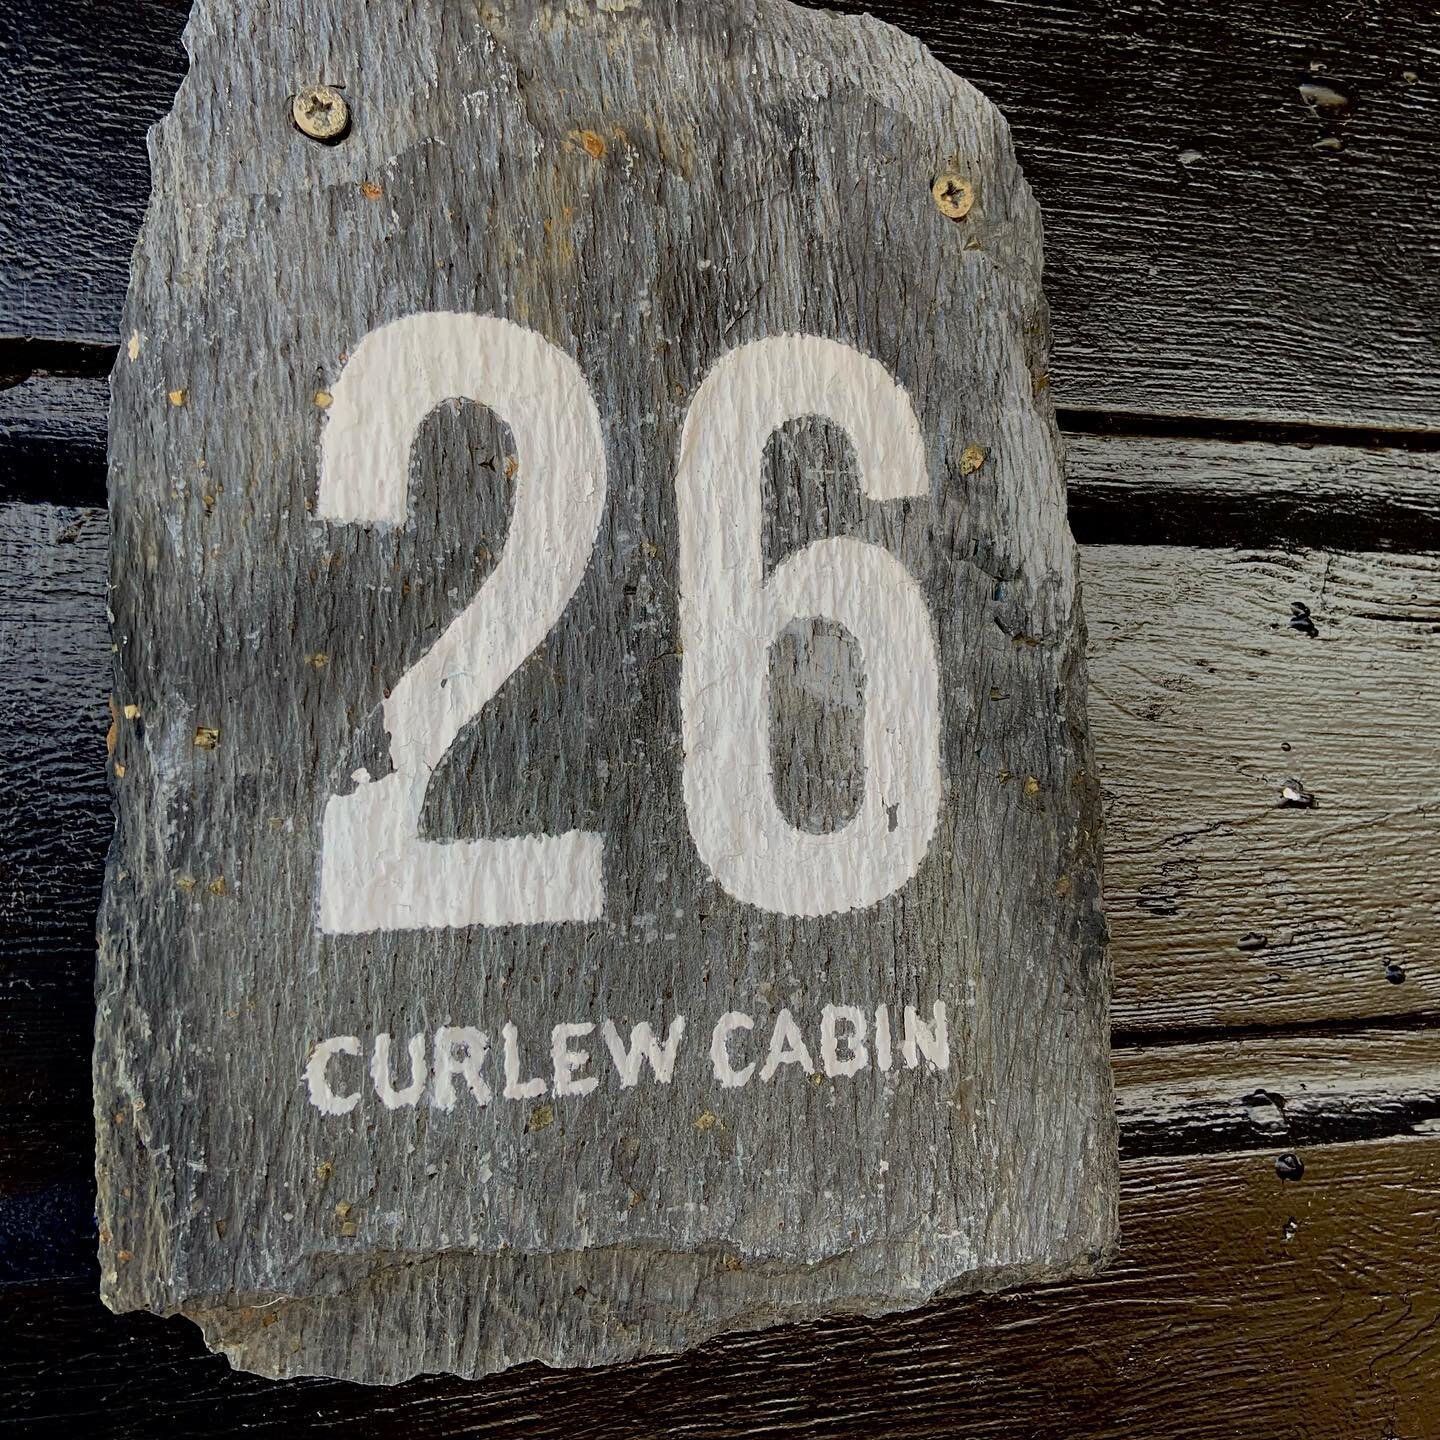 It&rsquo;s World Curlew Day today and we&rsquo;ve spent the day at the cabin getting ready to reopen next week and looking for Curlews on the shoreline. It&rsquo;s been a long few months but hopefully there&rsquo;s blue skies (and wild flowers) ahead